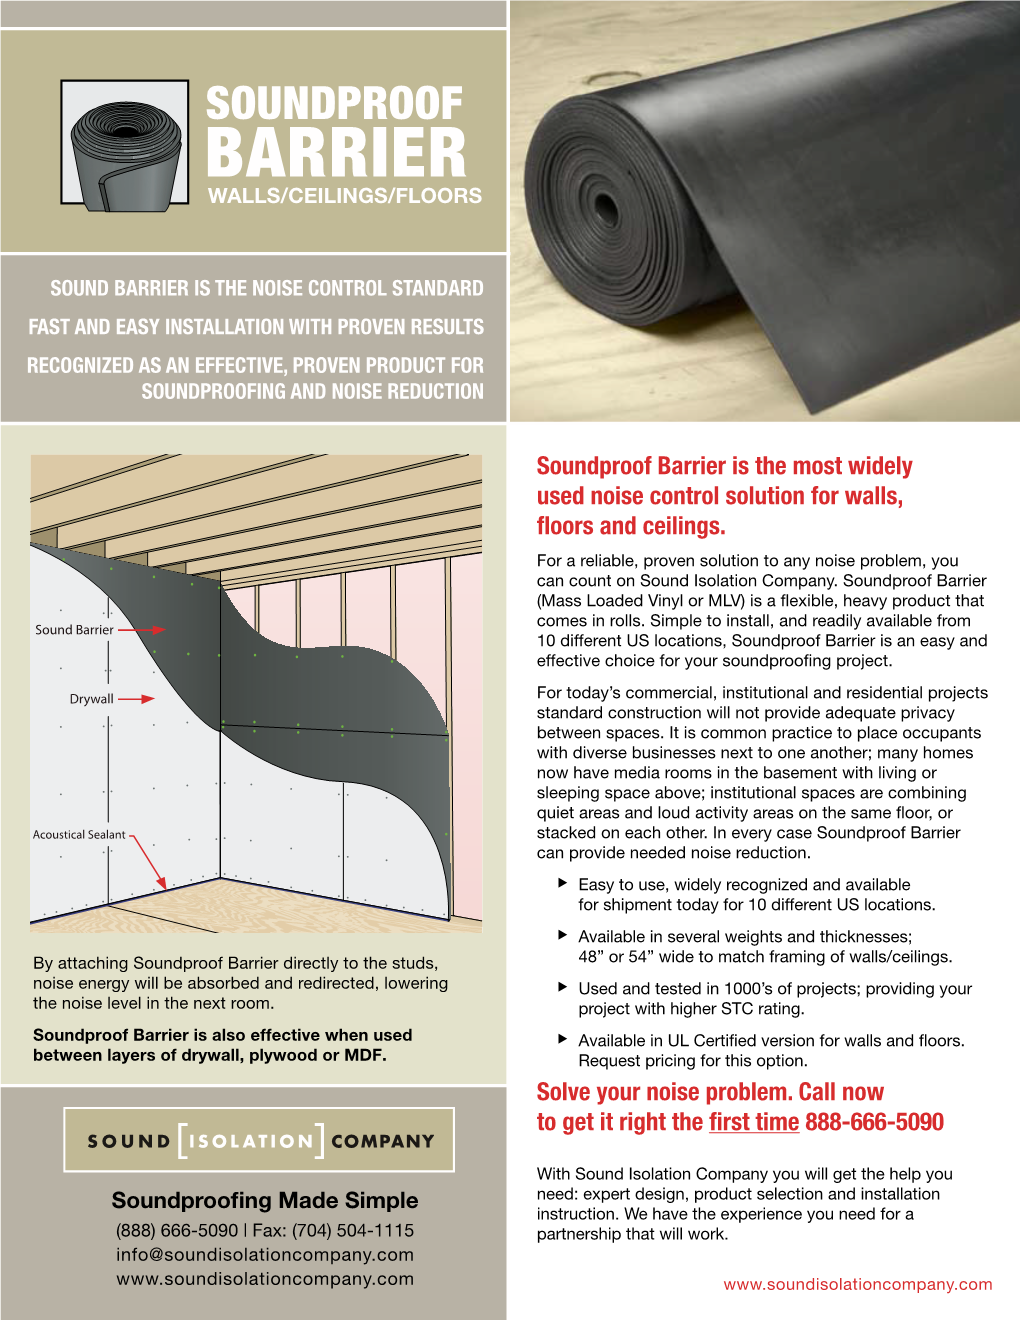 Soundproof Barrier Is the Most Widely Used Noise Control Solution for Walls, ﬂoors and Ceilings